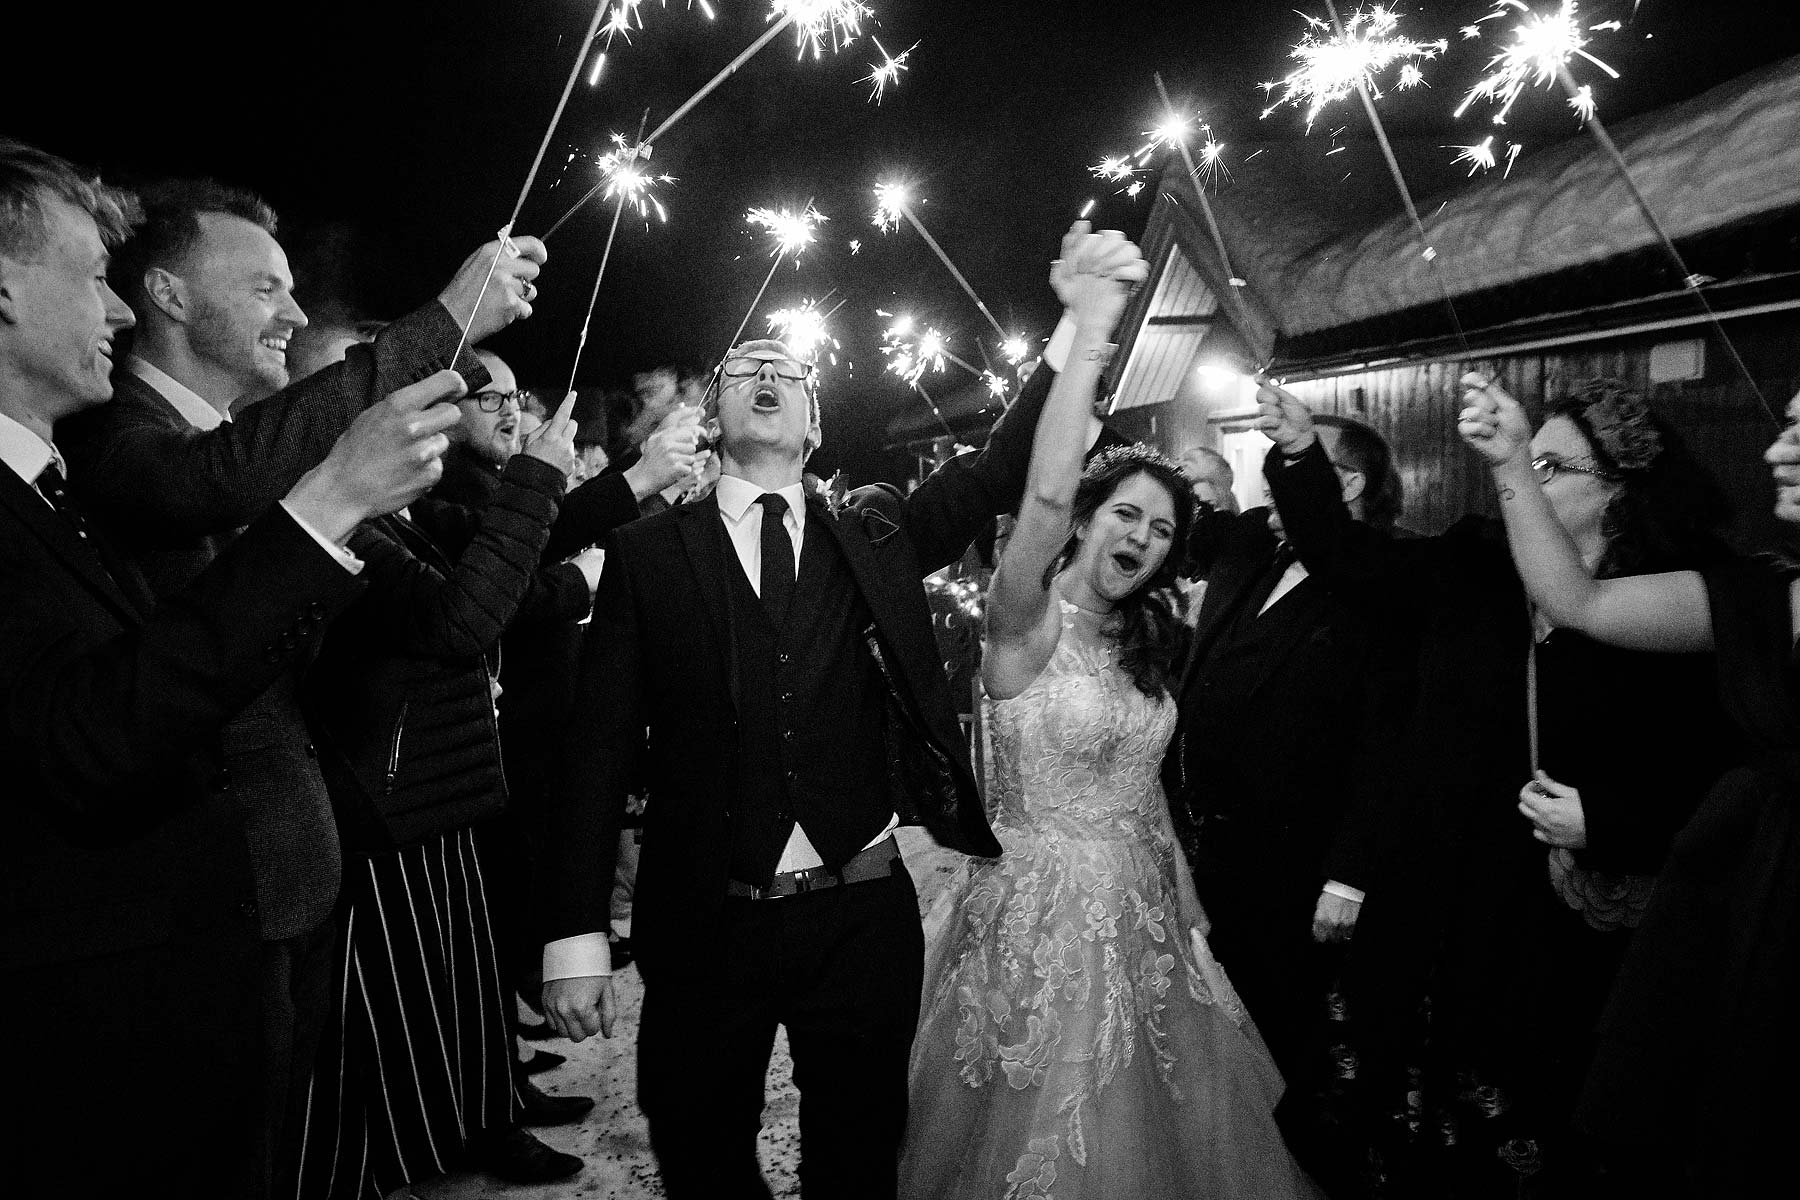 Creative storytelling wedding photography - great moment as bride and groom leave under canopy of sparklers